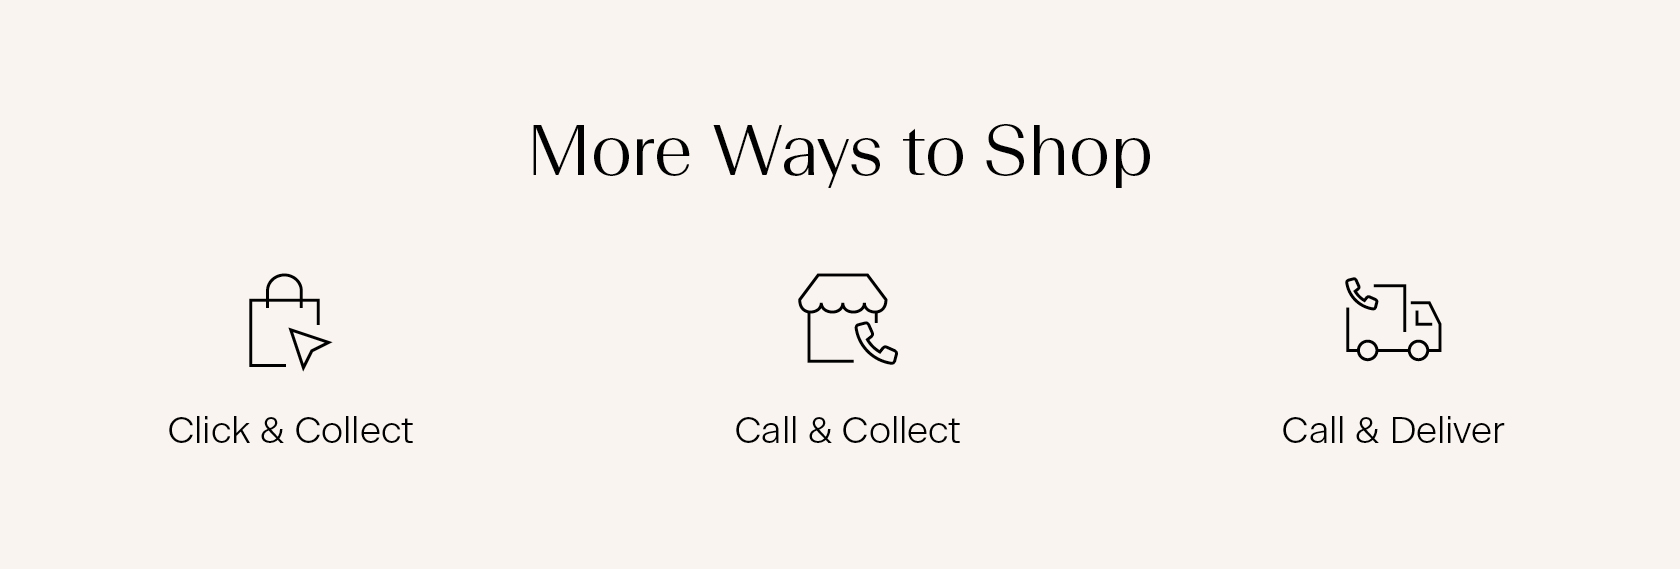 Click and Collect - More Ways to Shop.jpg